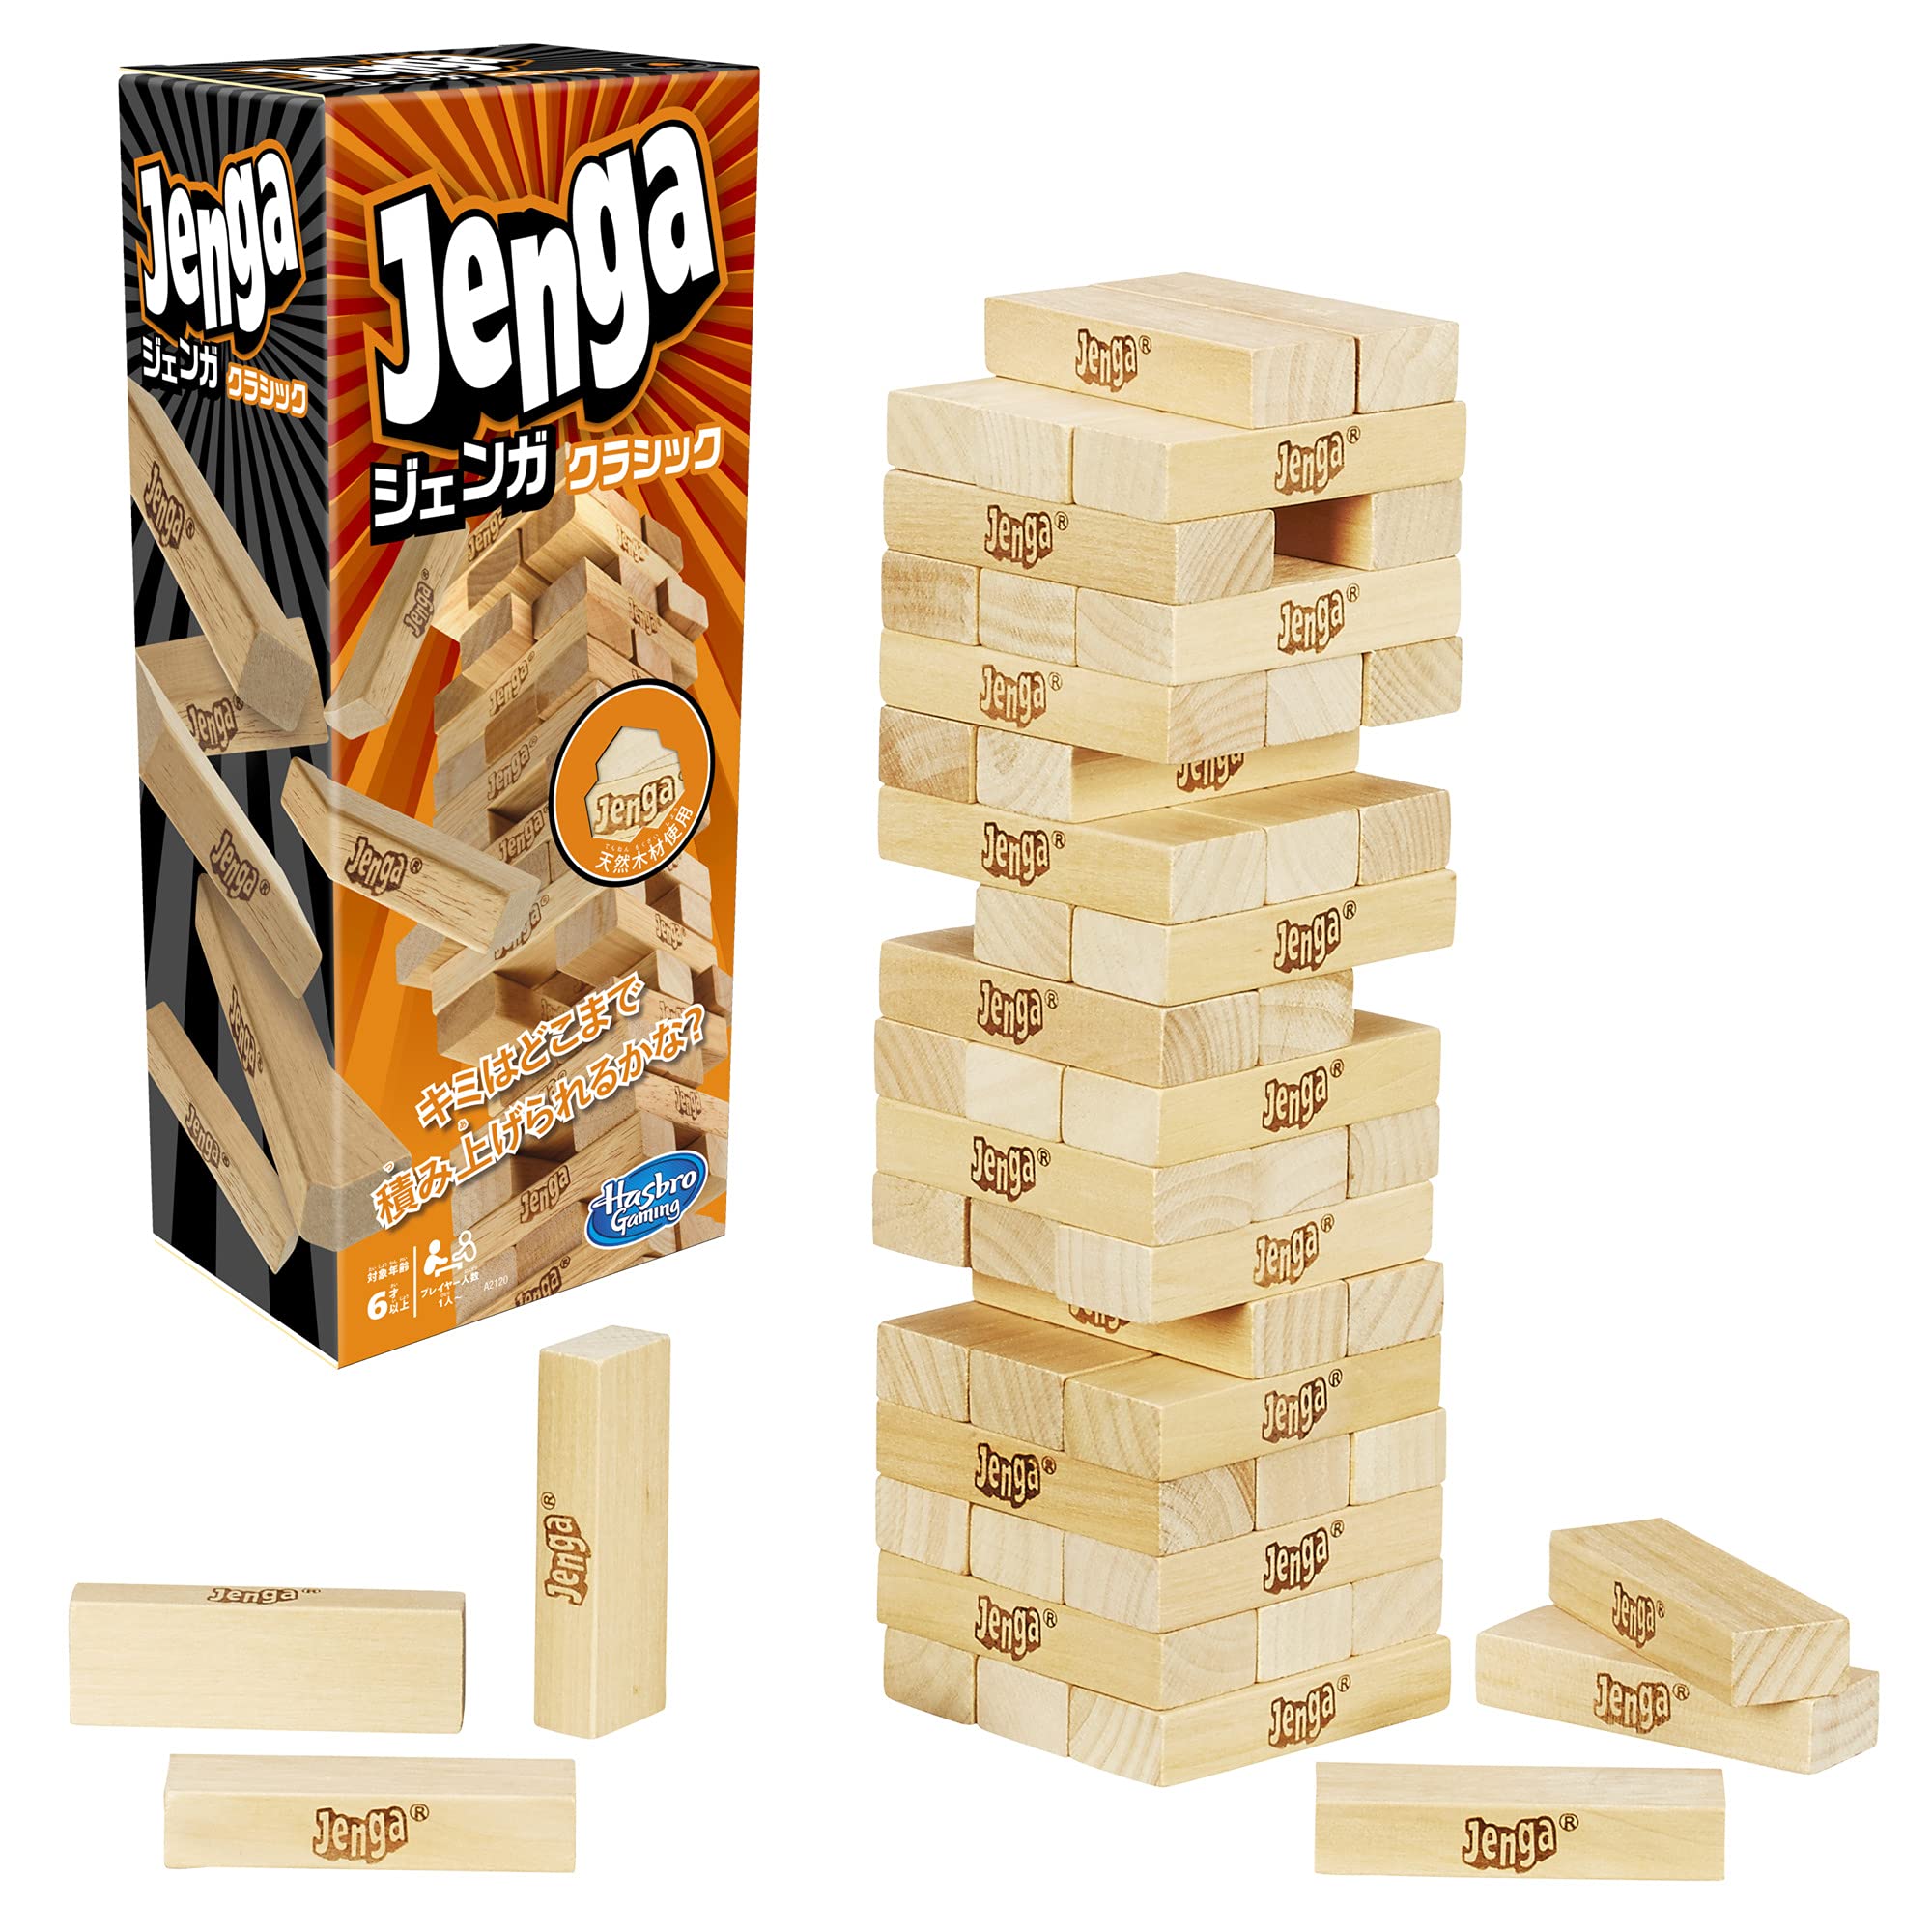 Jenga Classic A2120 Game, Officially Licensed Product